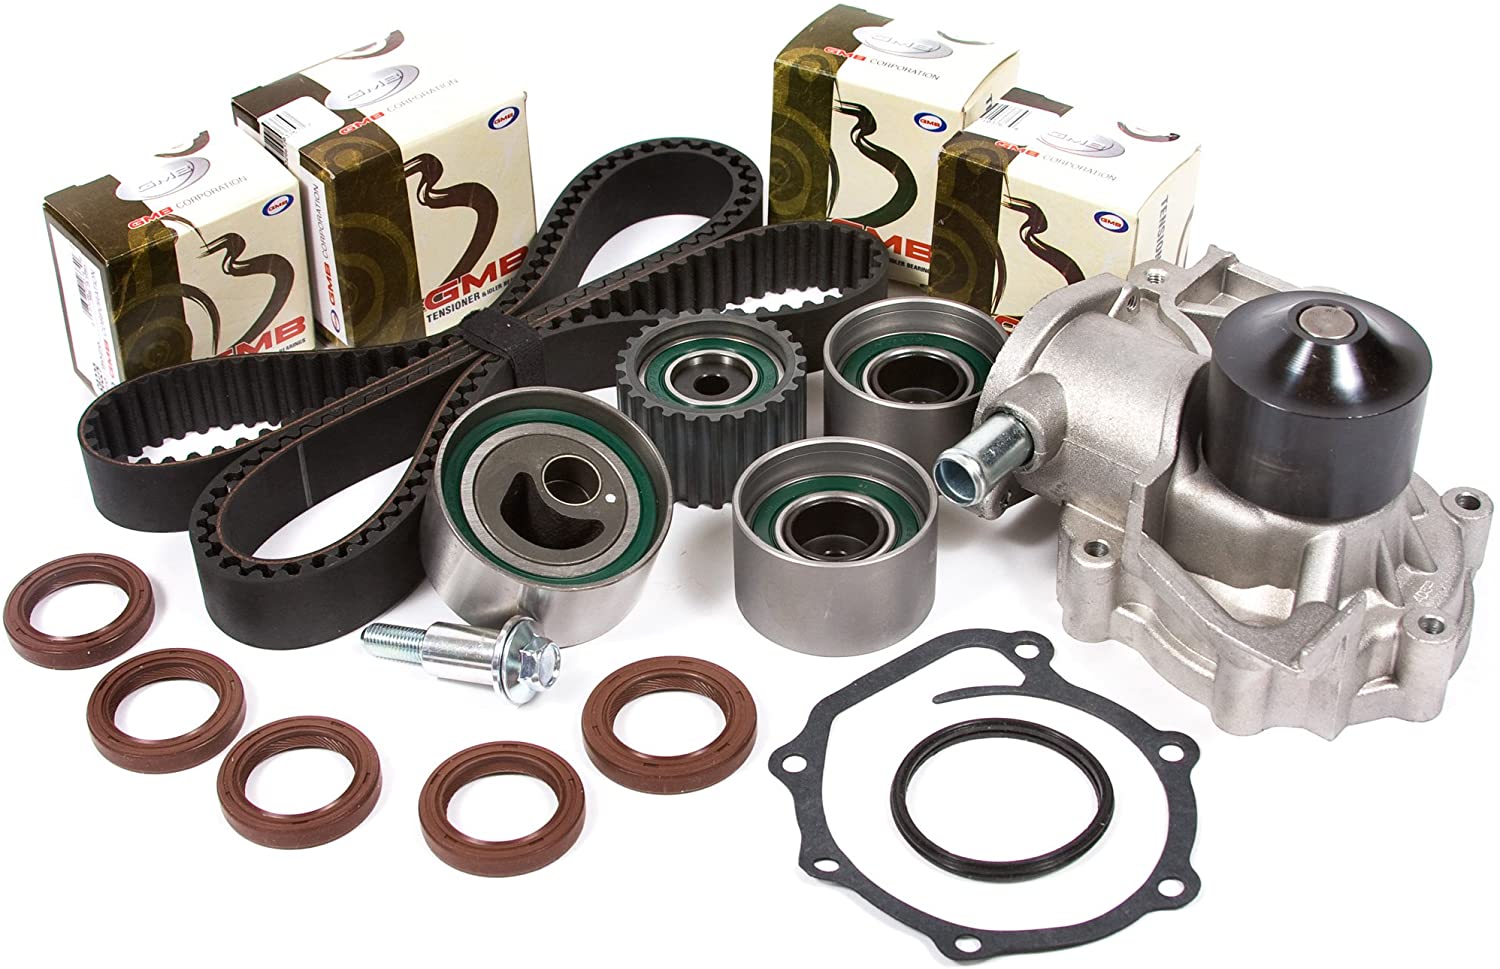 Evergreen TBK277WPT Compatible With 96-97 Subaru Legacy Outback DOHC 2.5L EJ25 Timing Belt Kit Water Pump